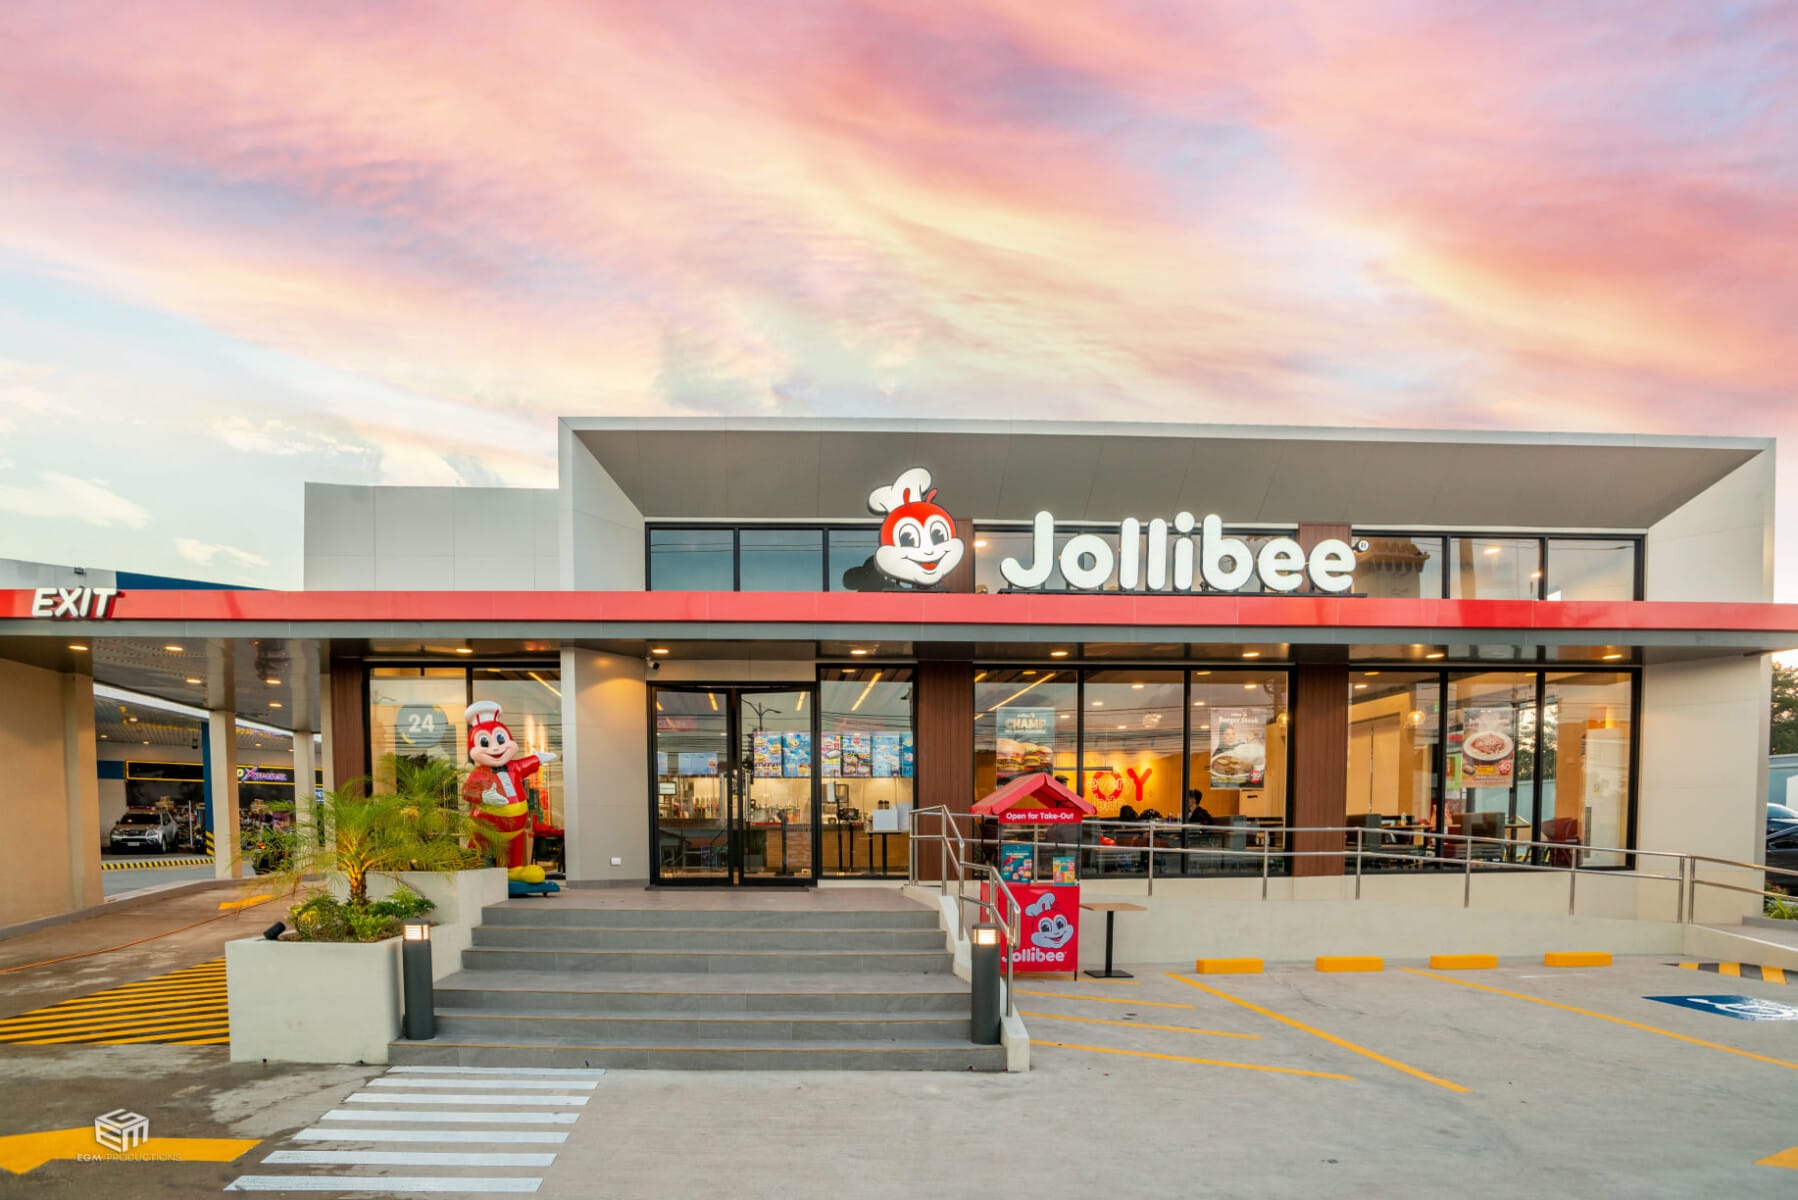 what is the business model of jollibee